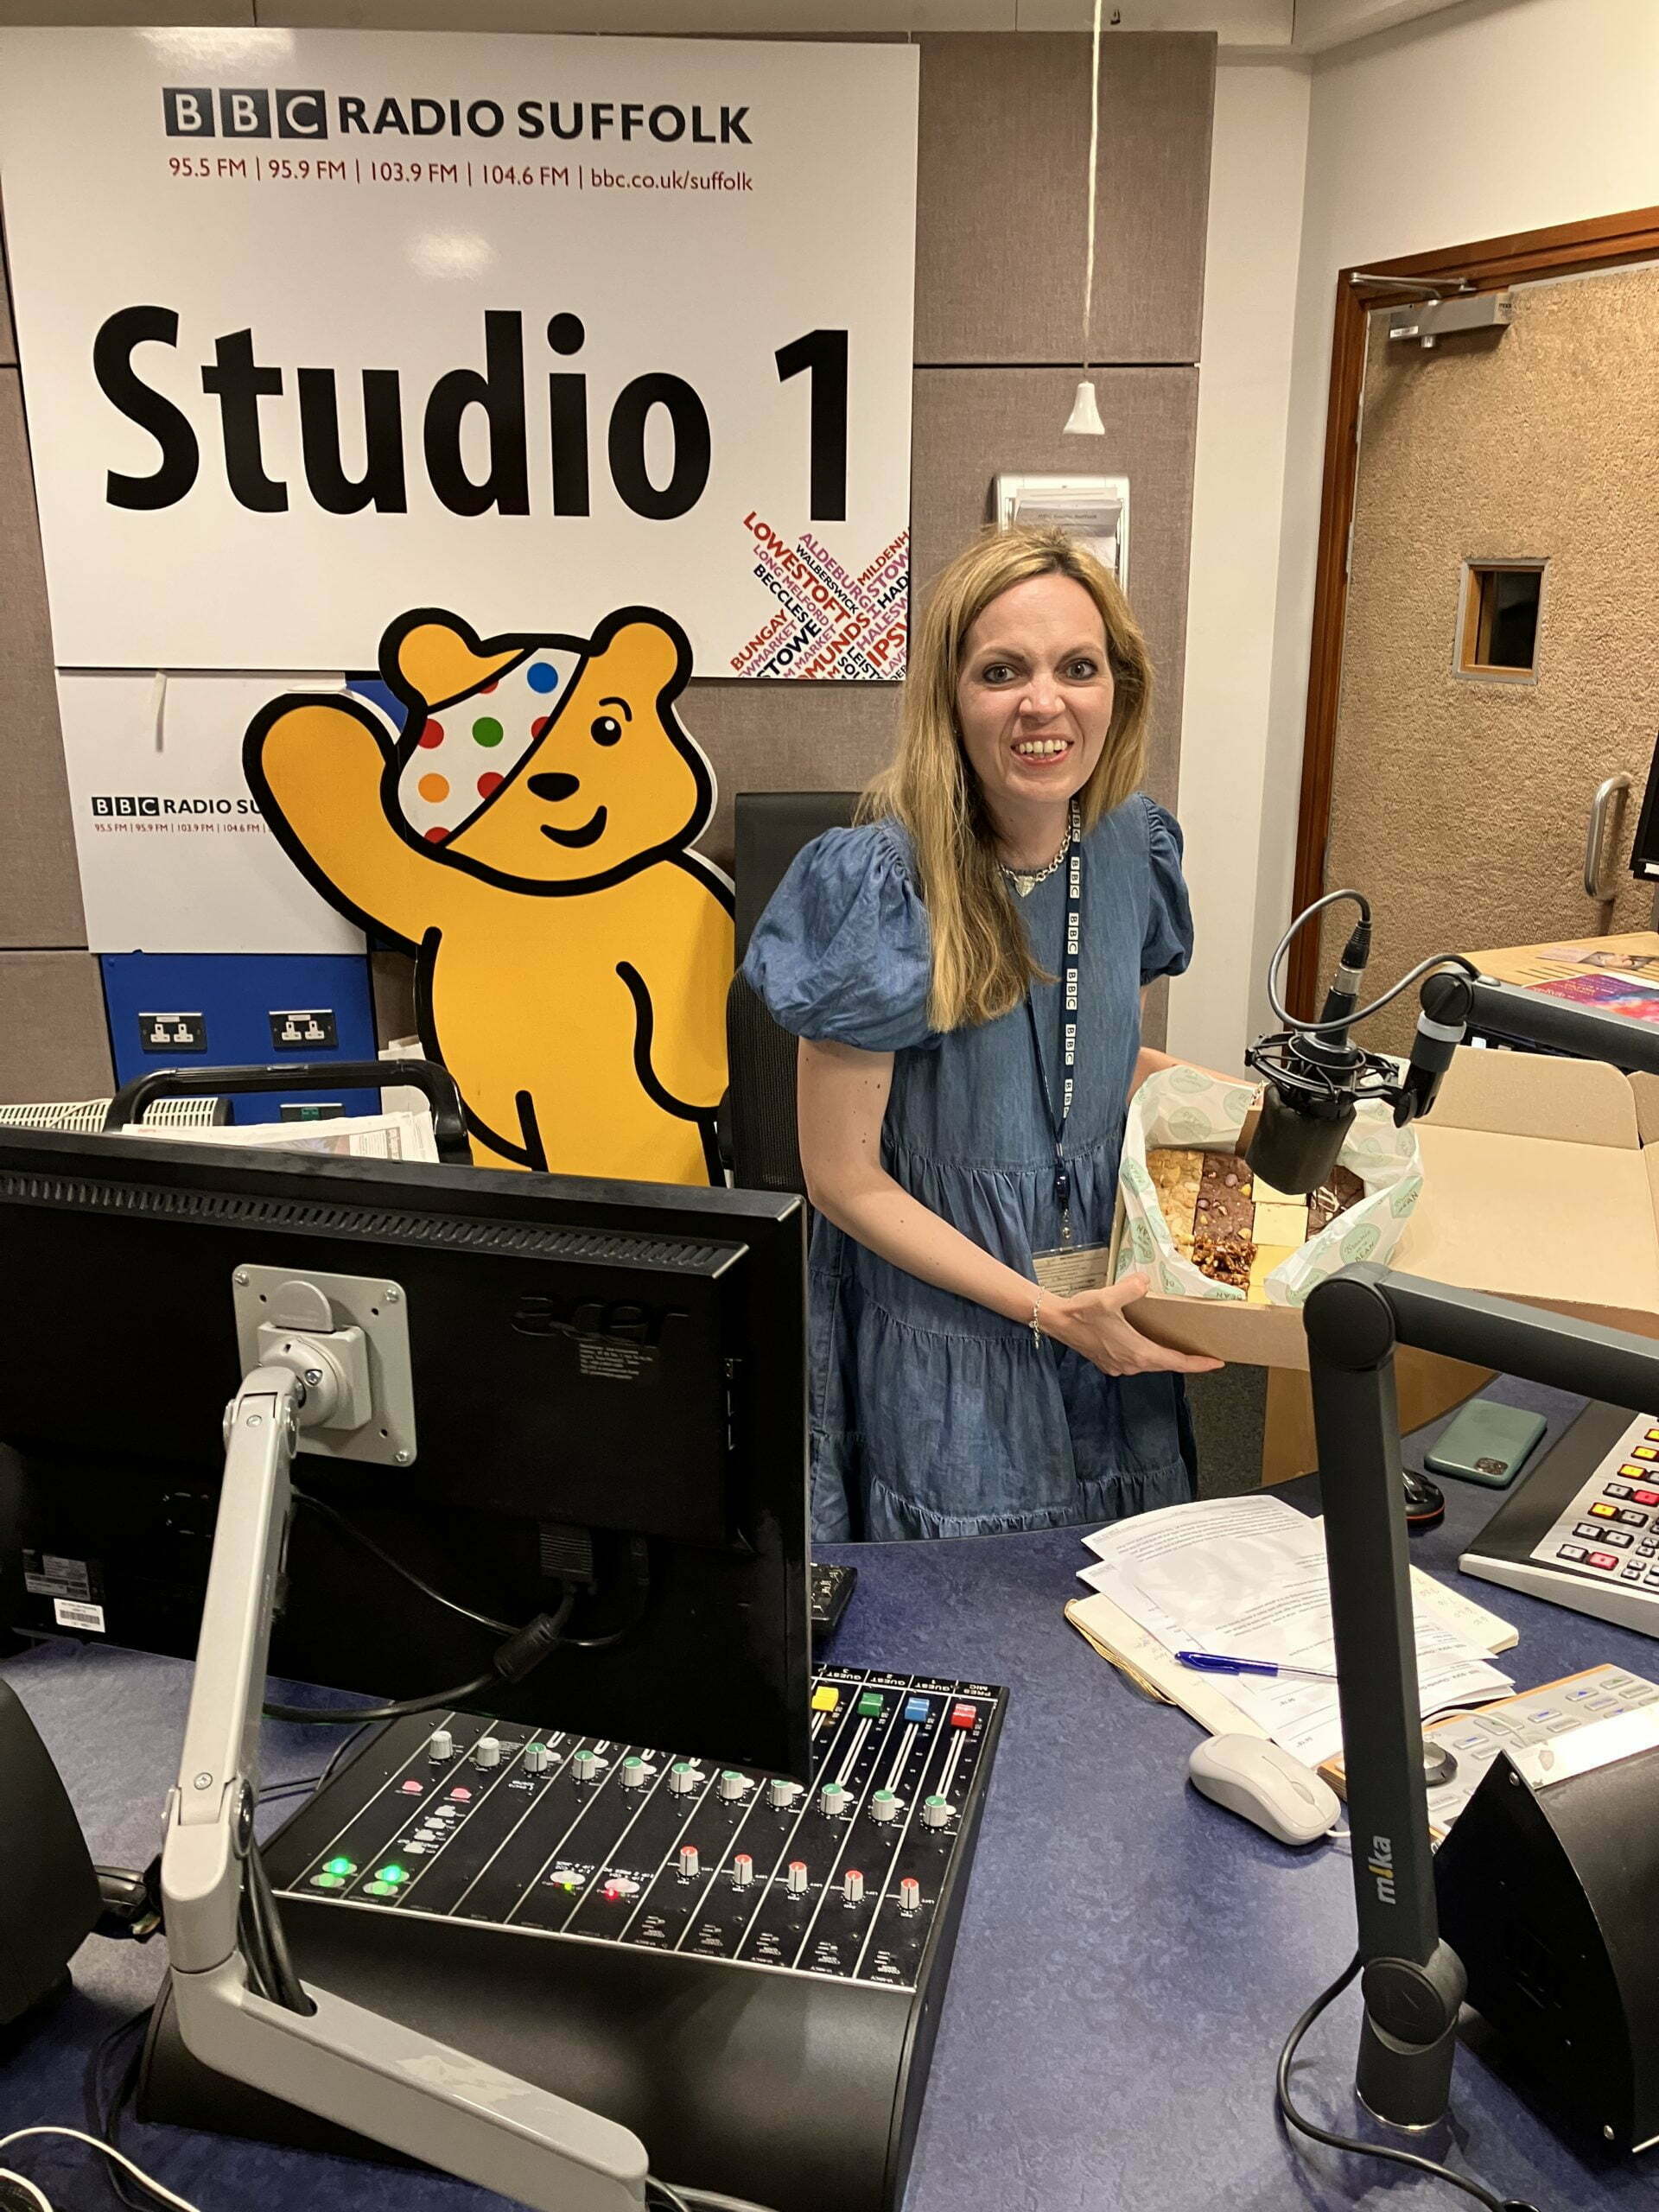 Pudsey Bear is waving in the background of Studio 1 at BBC Radio Suffolk. Sarah Lilley the presenter is behind the mixing desk with a large box of brownies. She's smiling.